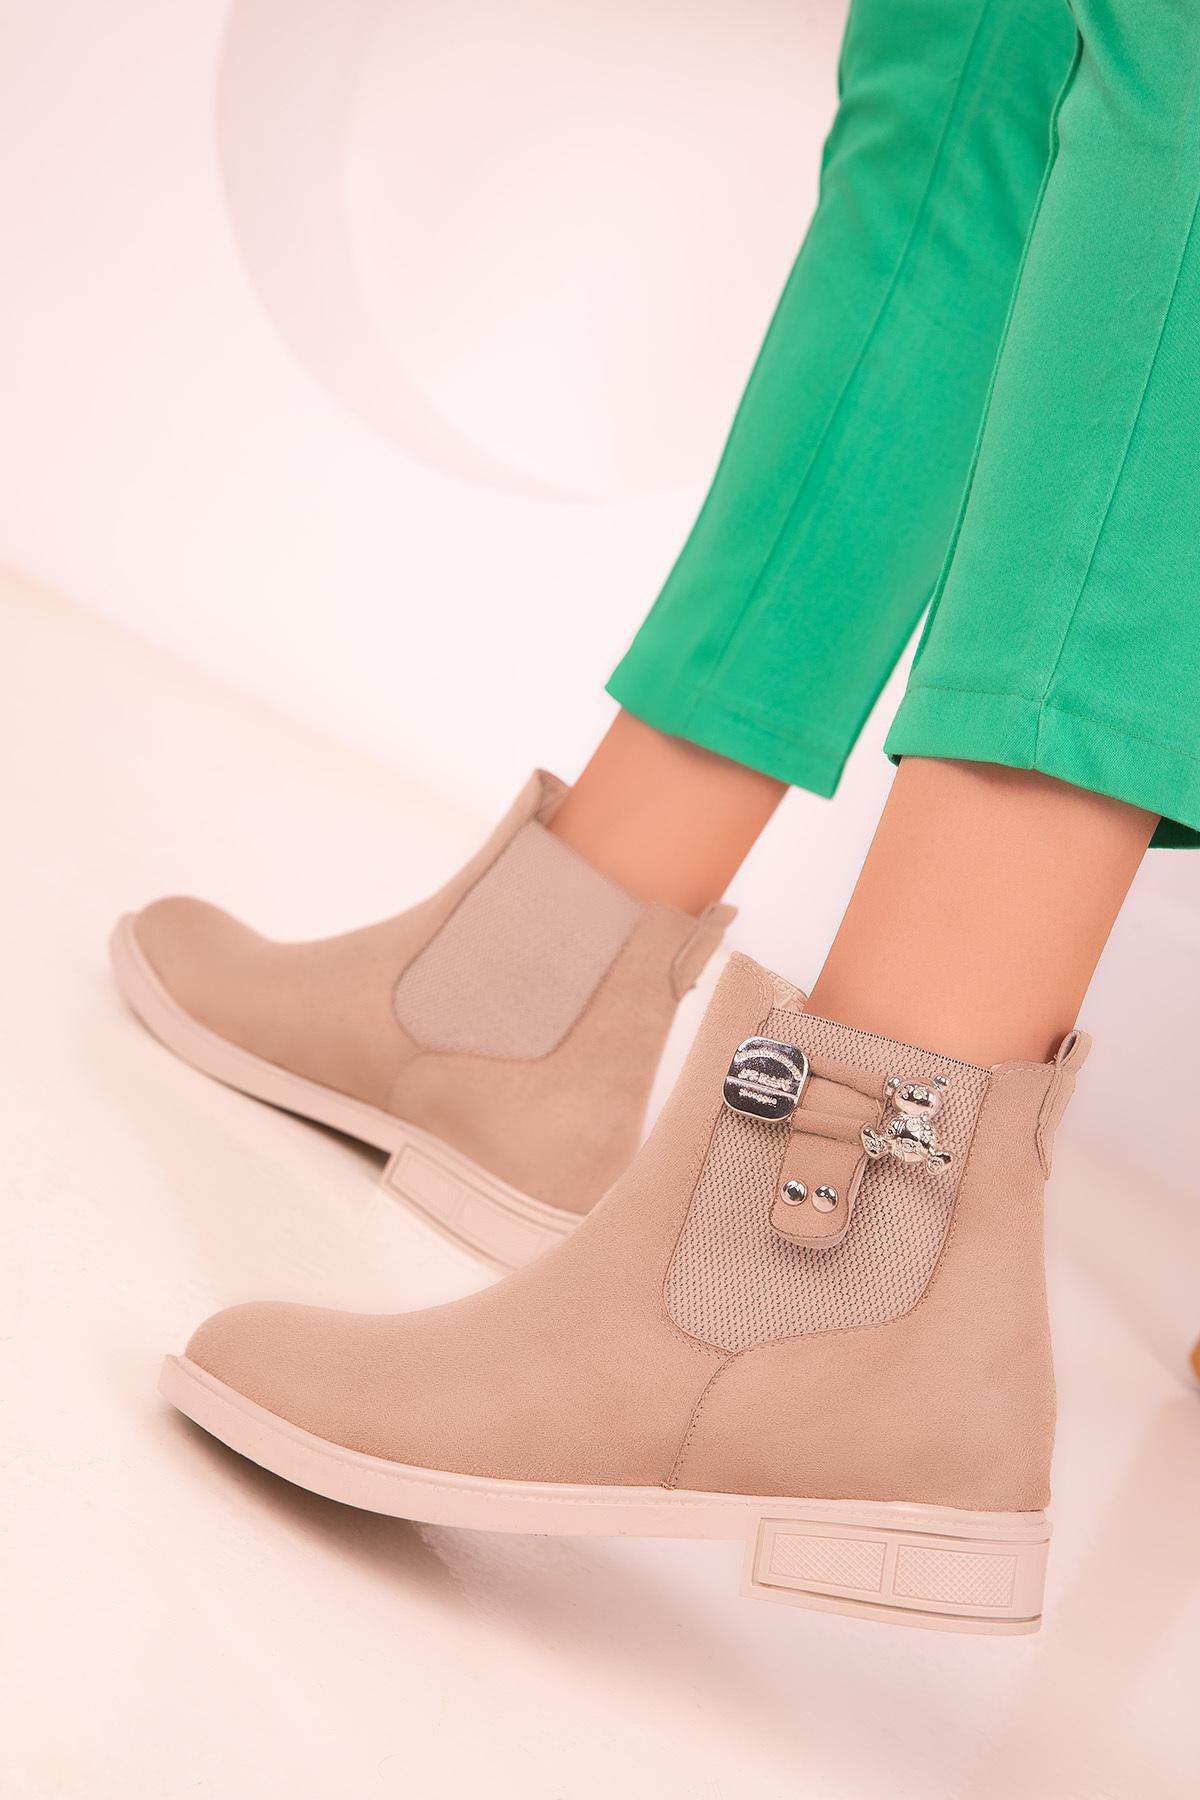 SOHO - Beige Ankle Suede Boots